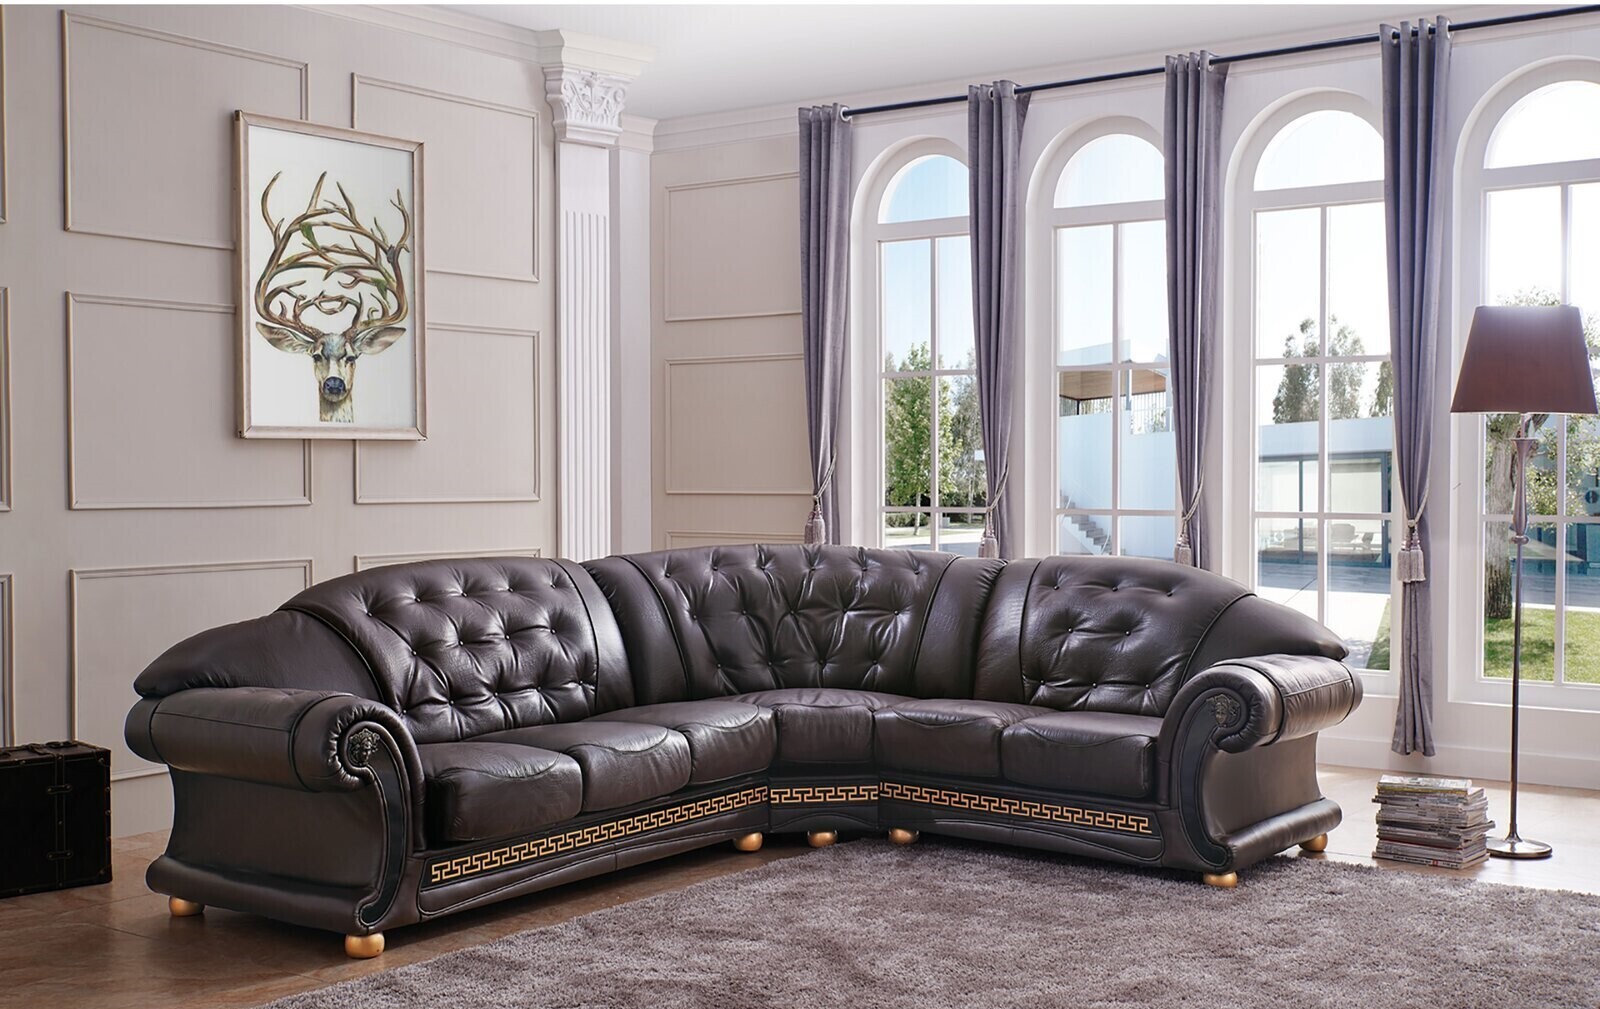 5pc Modern Round Sectionals Leather Sofa S506bn for sale online 